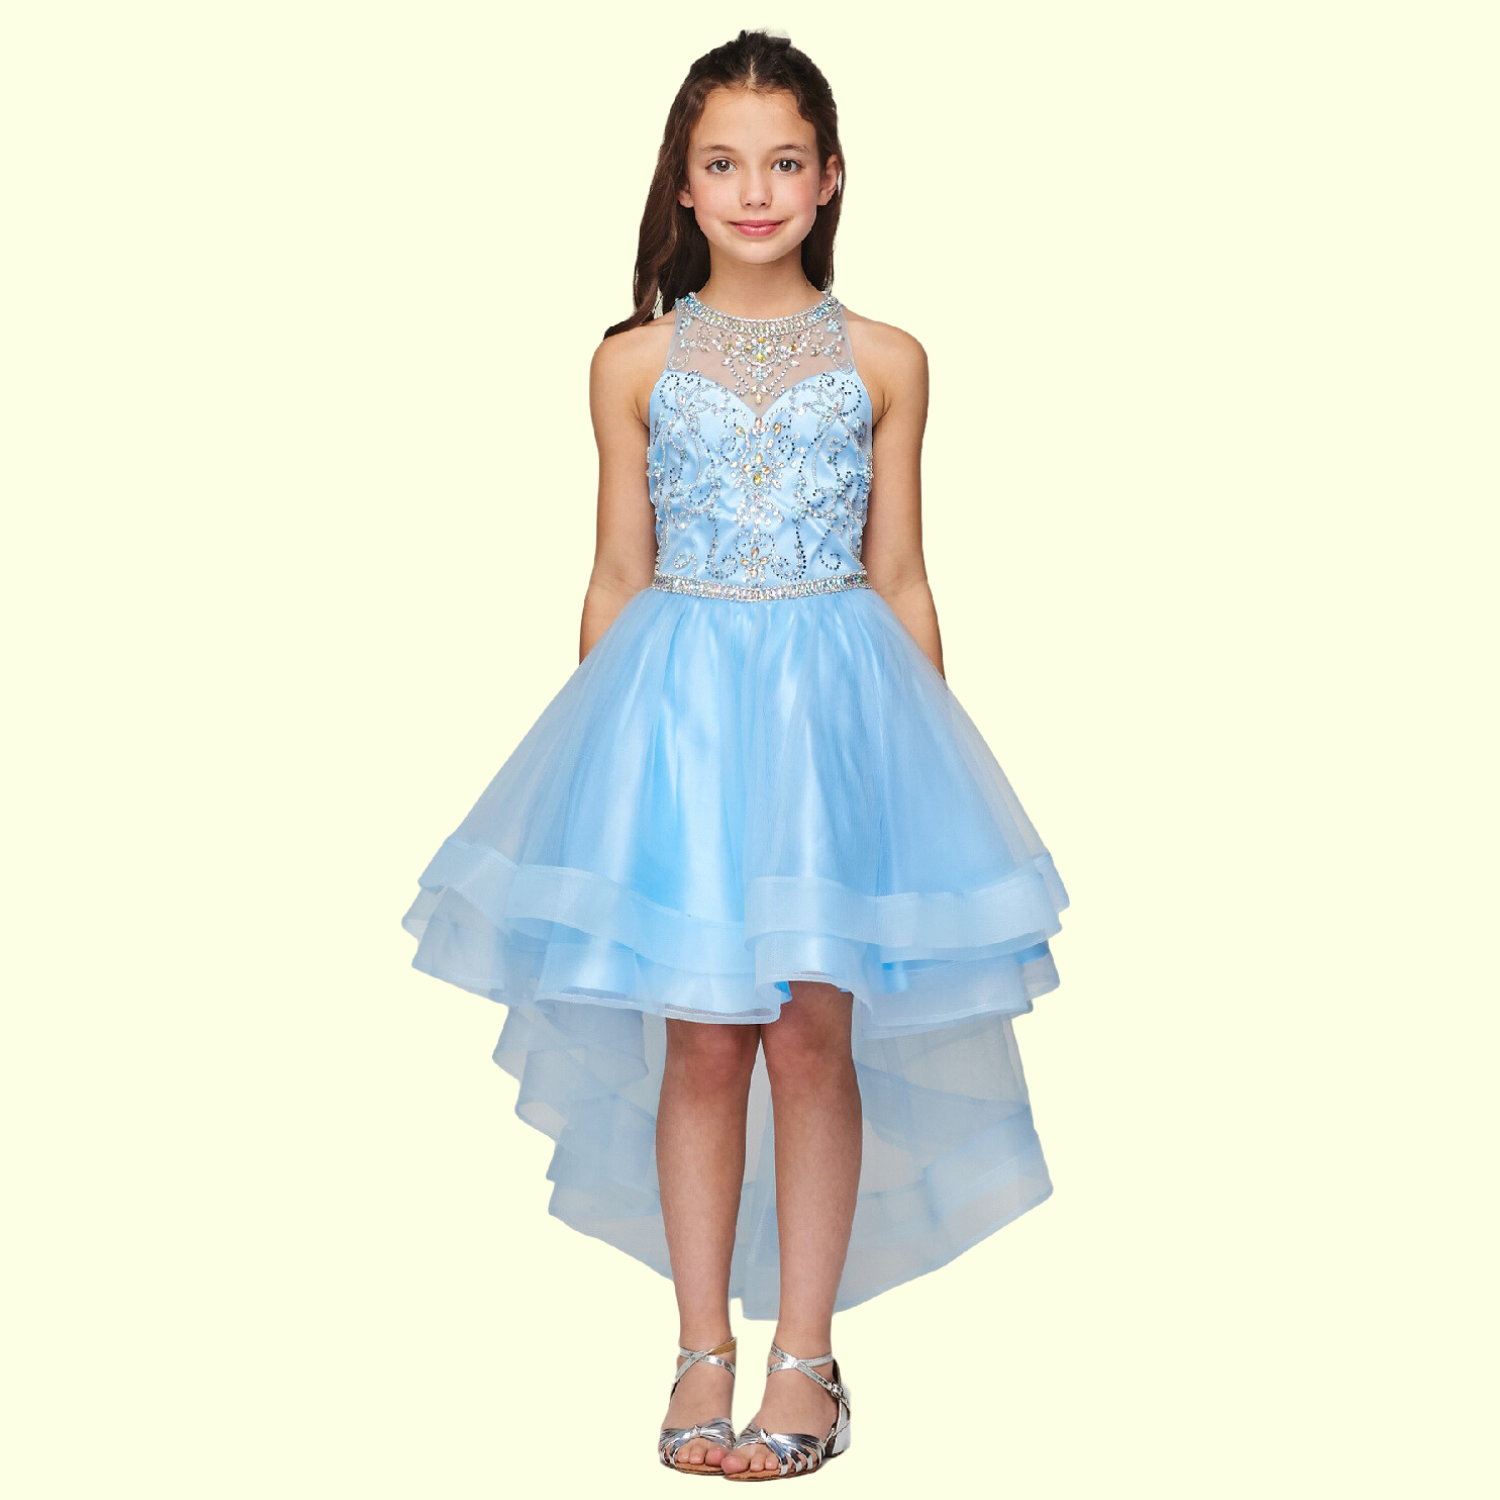 EASTER LOOK BOOK  Easter fashion, Girls special occasion dresses, Fashion